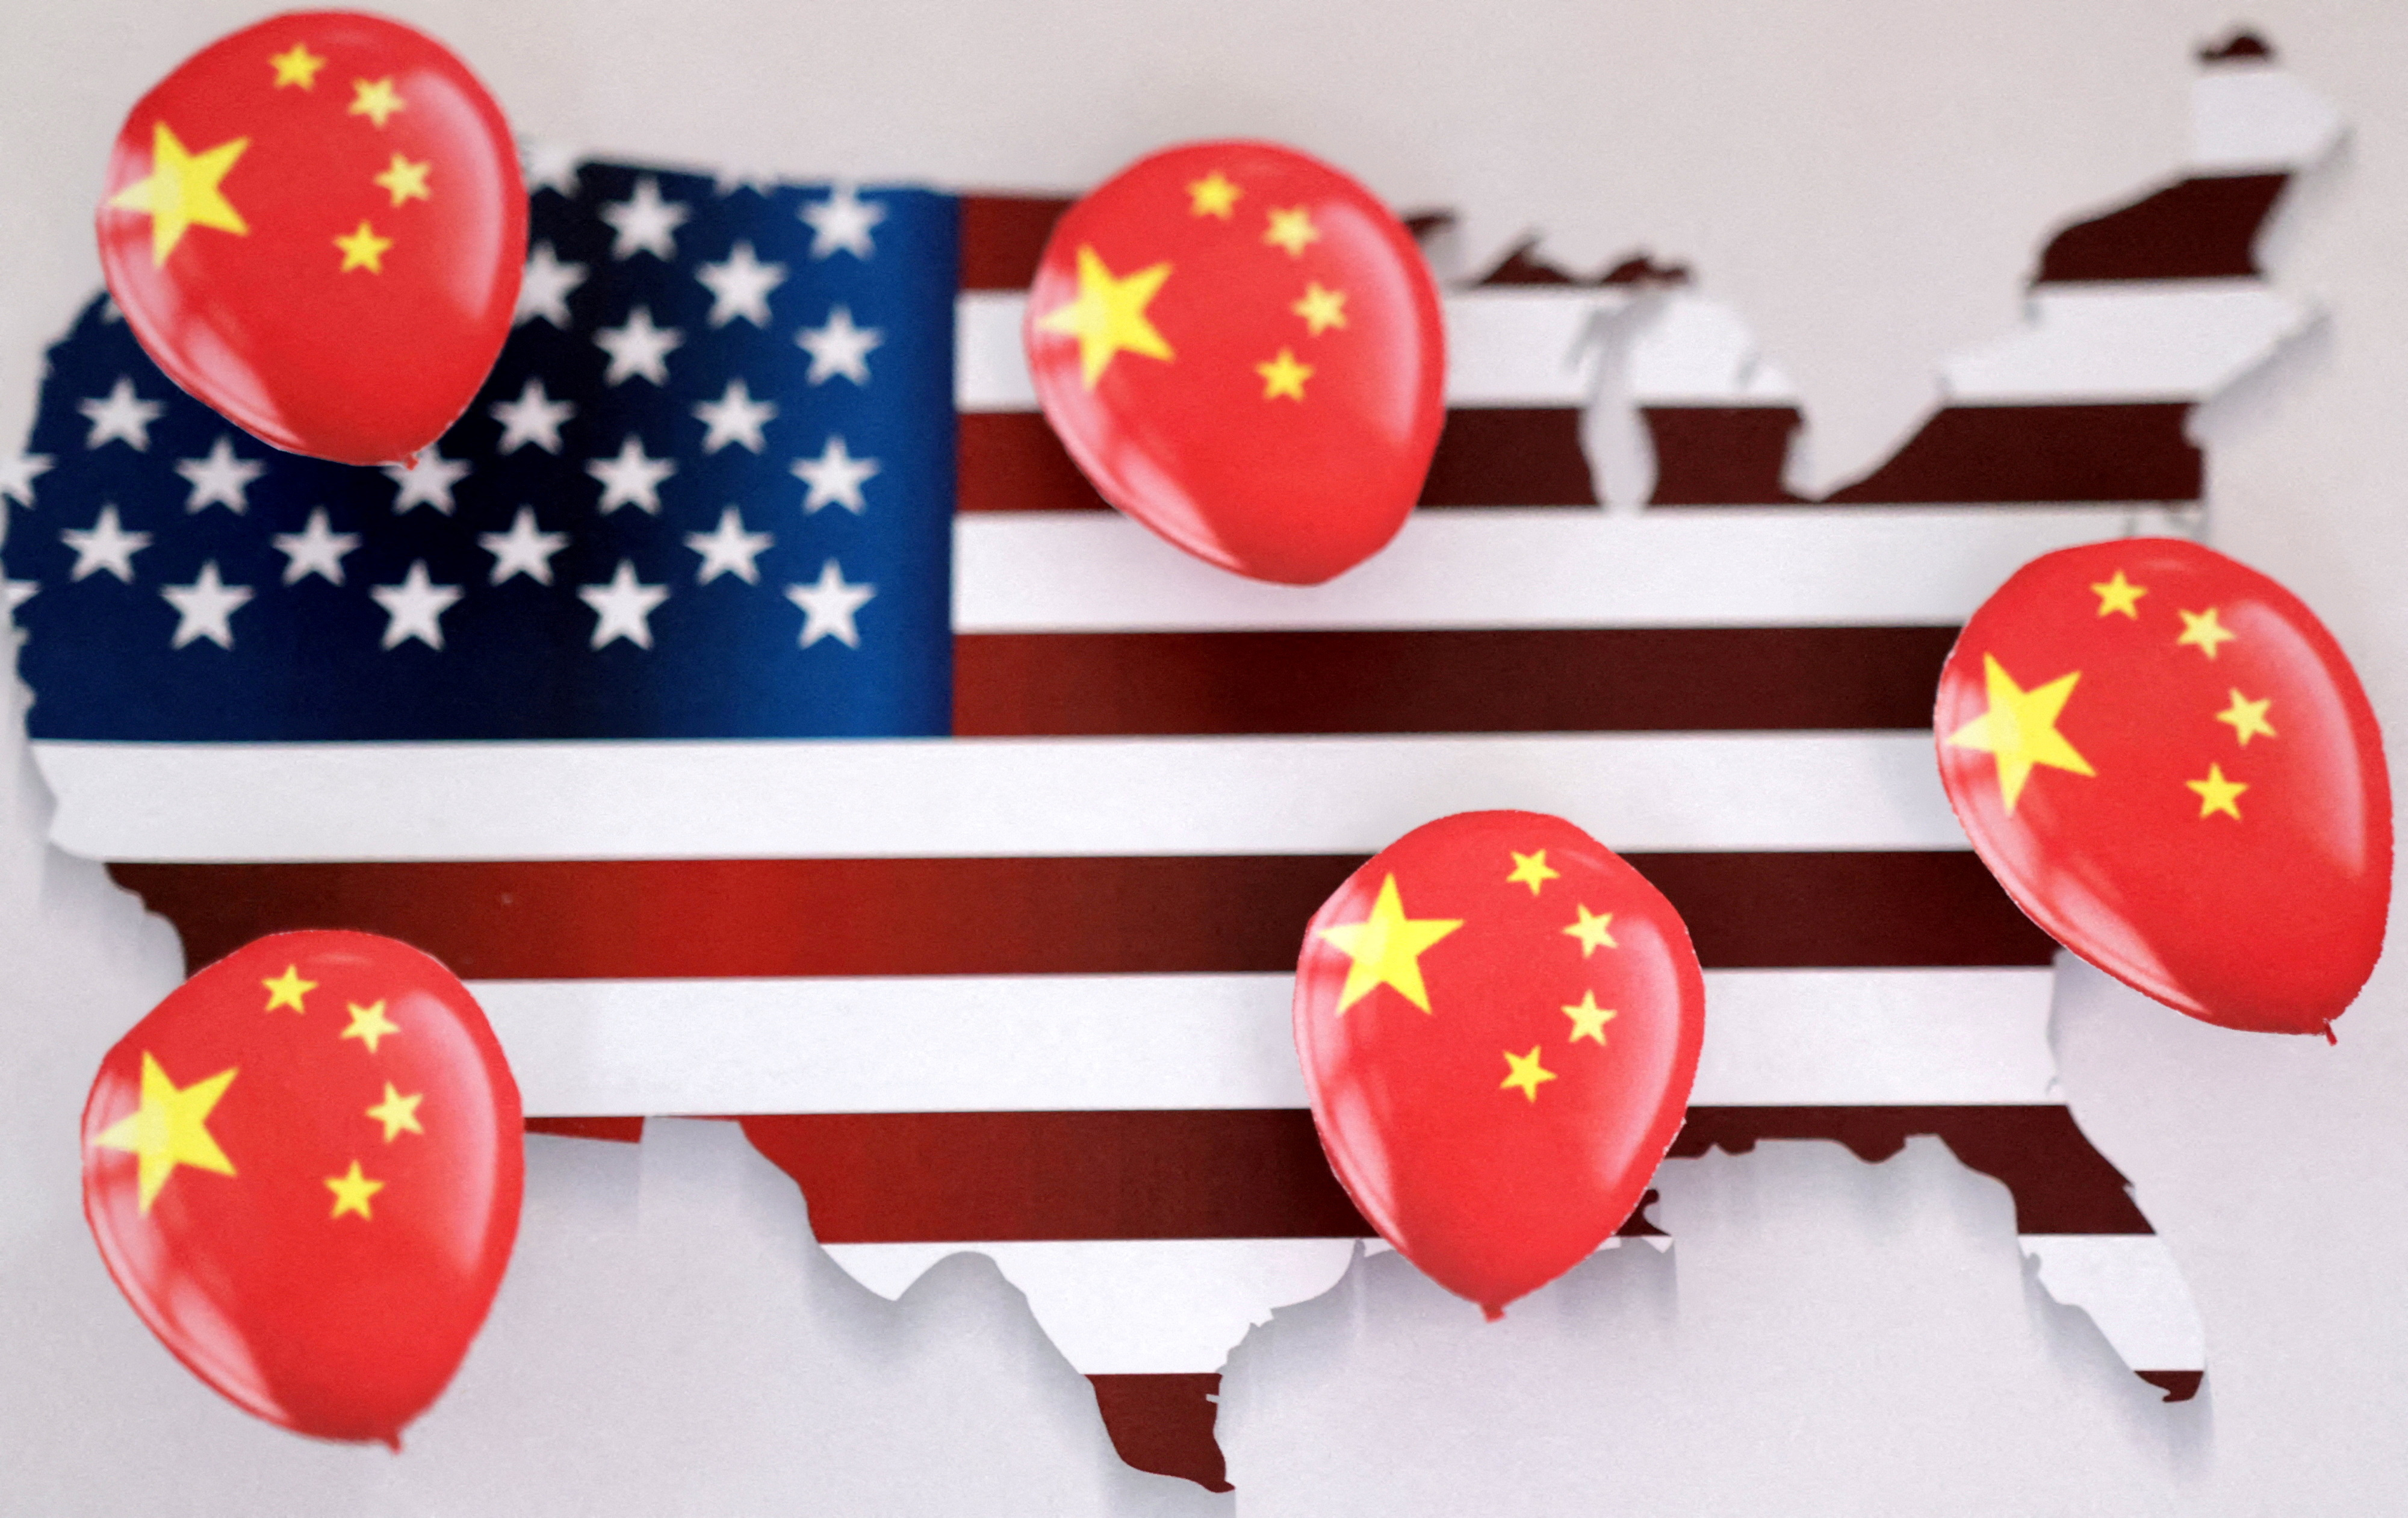 Illustration shows printed balloons with Chinese flag and U.S. map outline